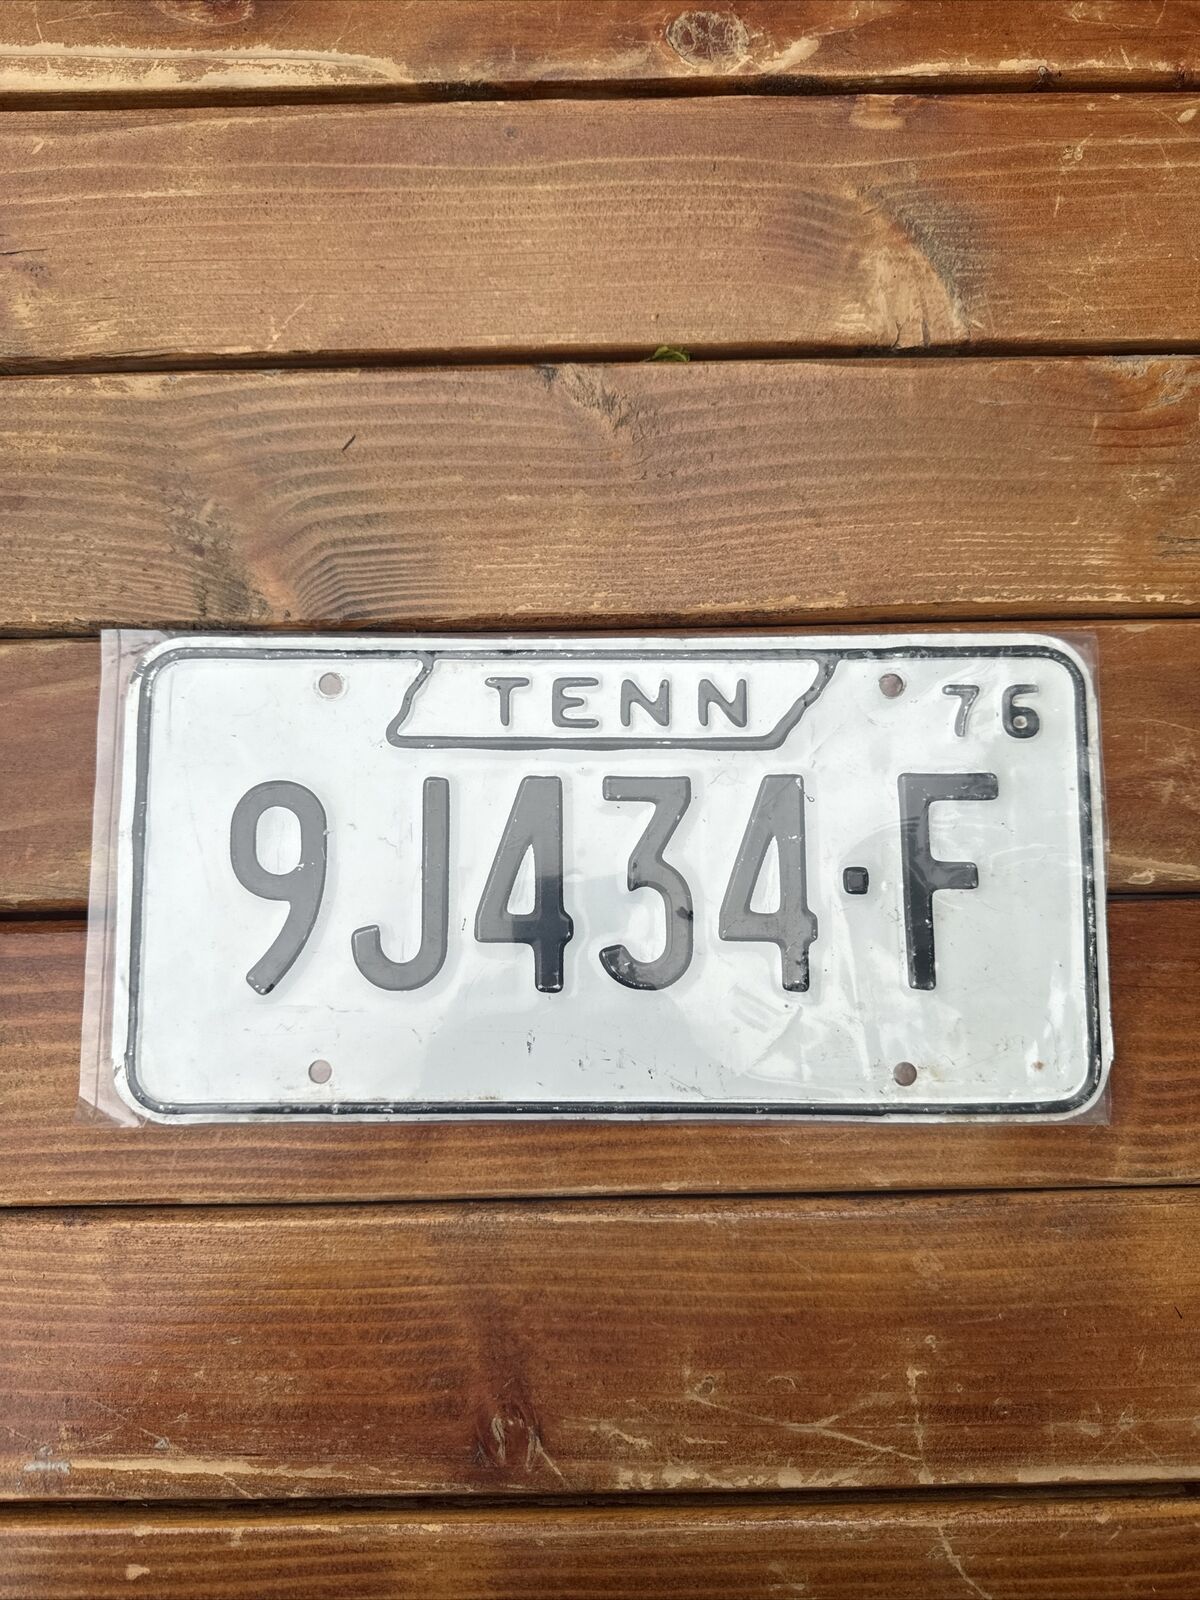 1976 Tennessee License Plate